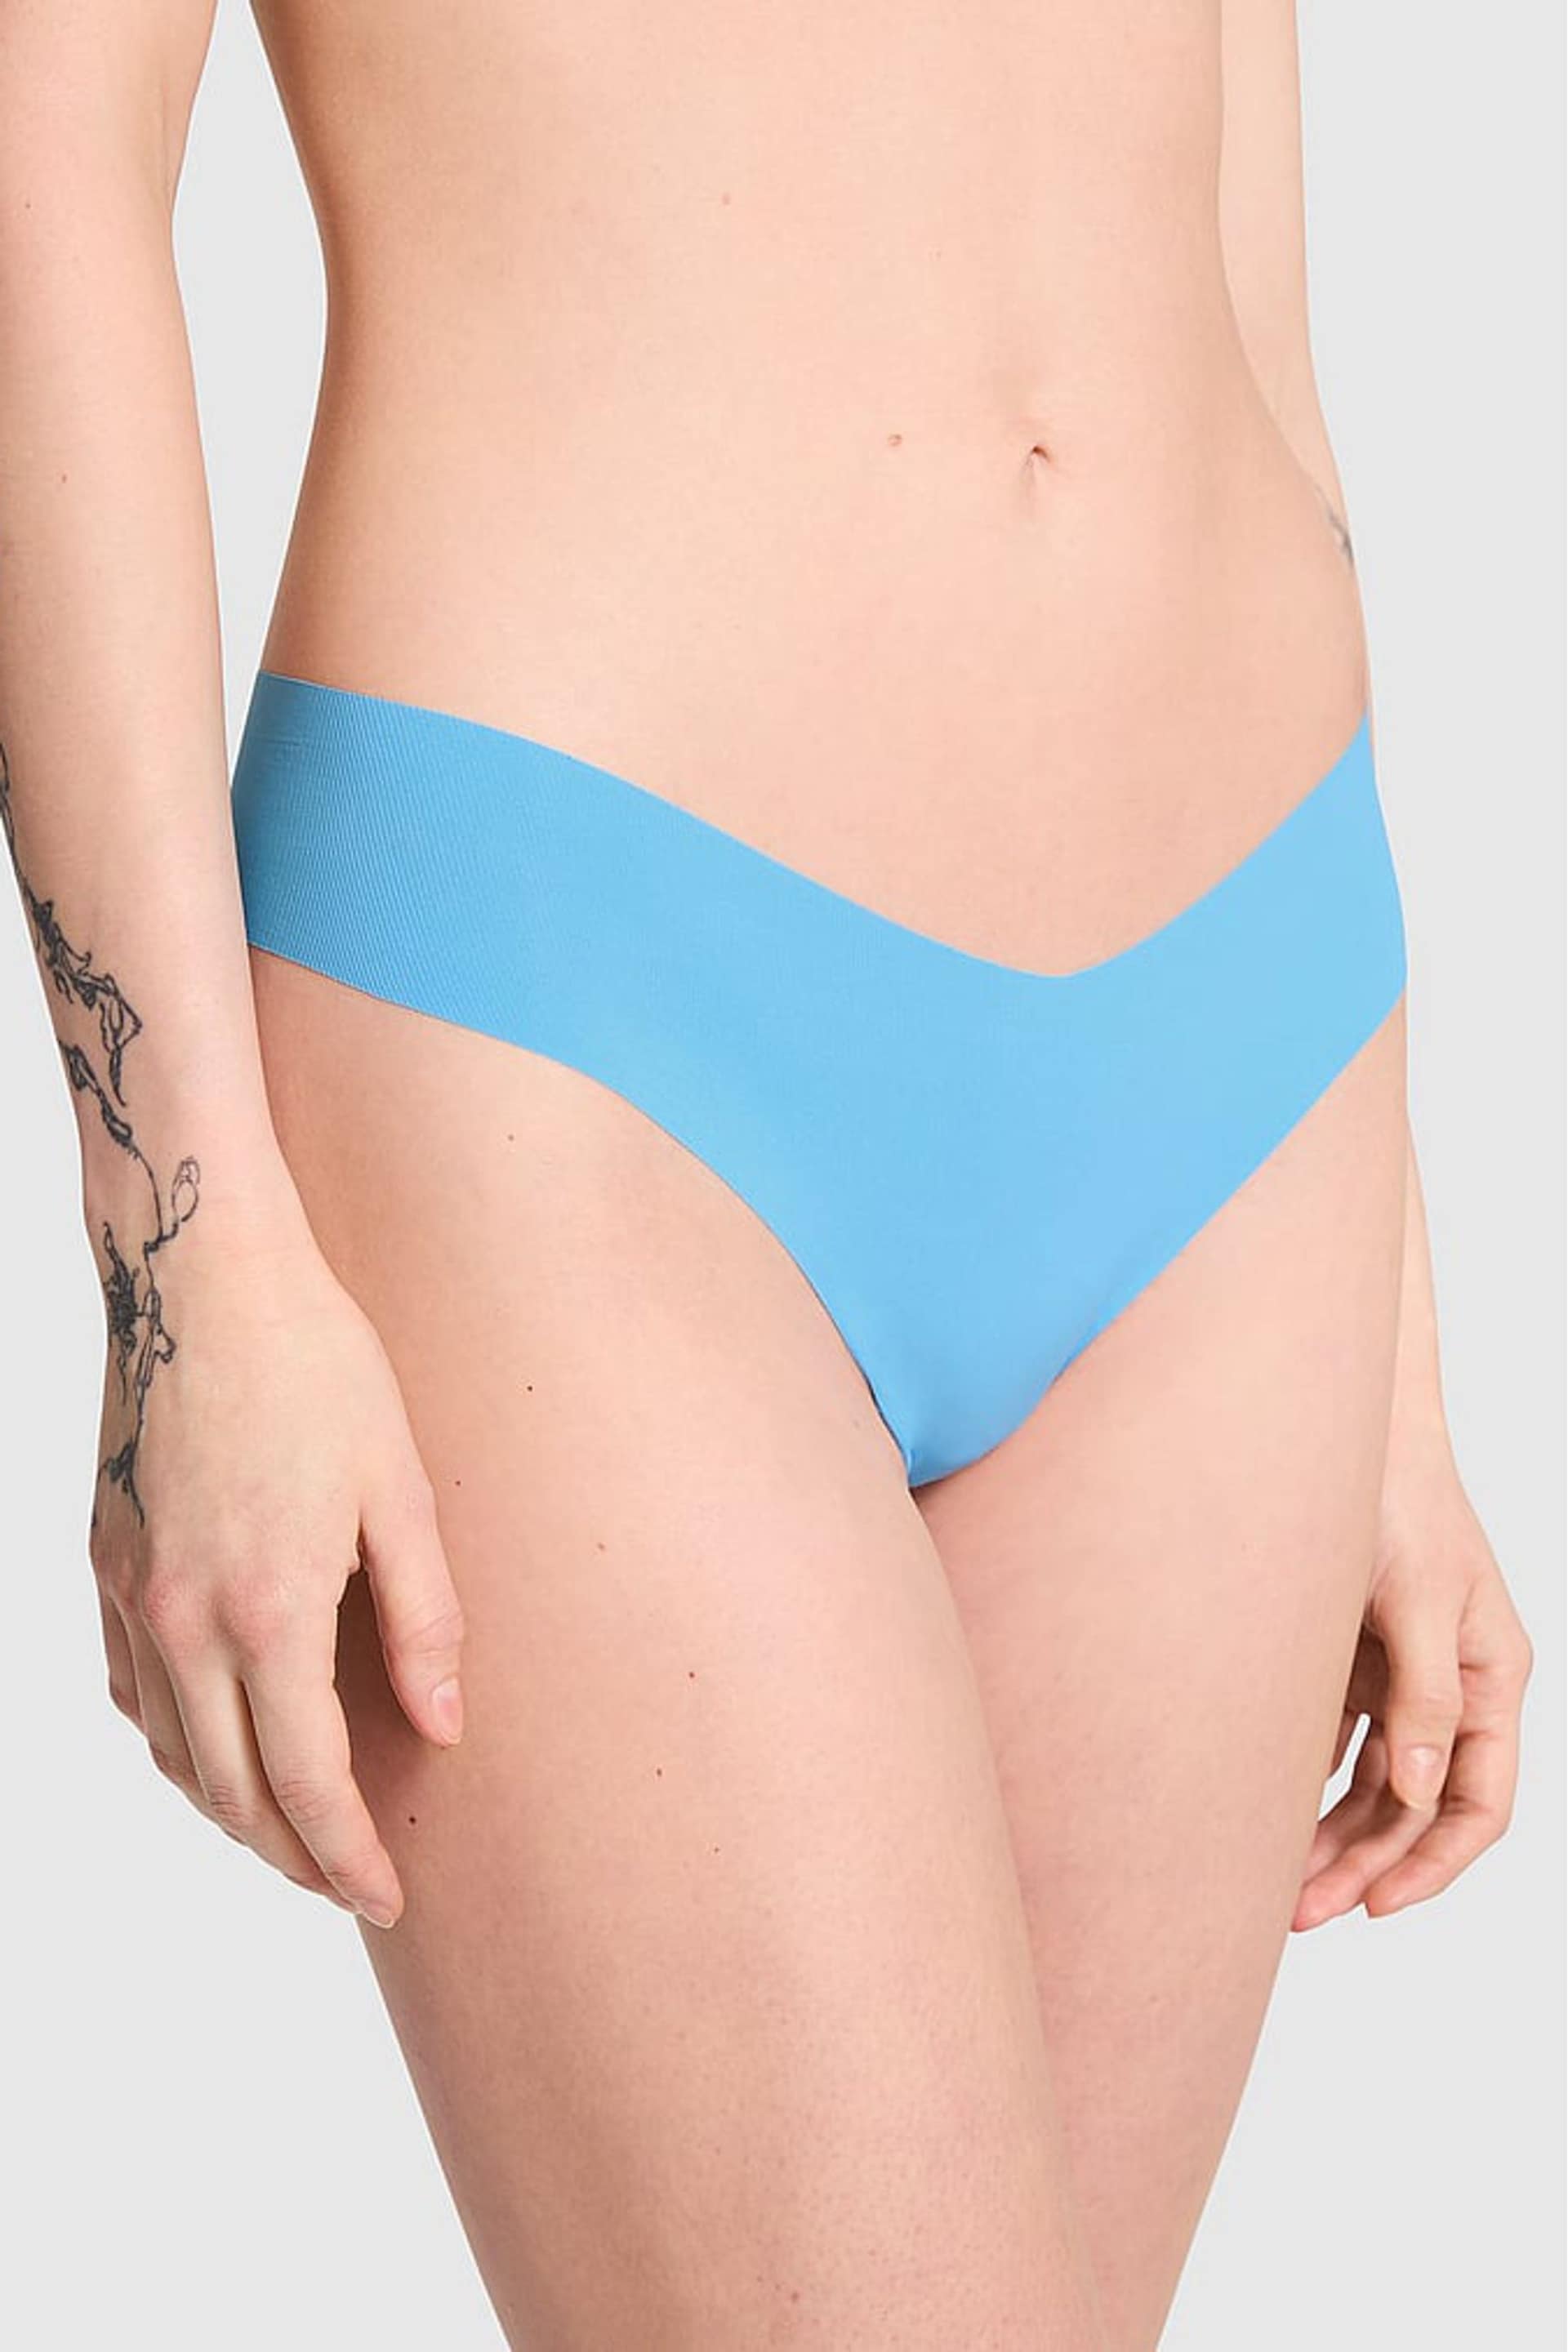 Victoria's Secret PINK Castaway Blue Rib Thong Knickers - Image 1 of 3